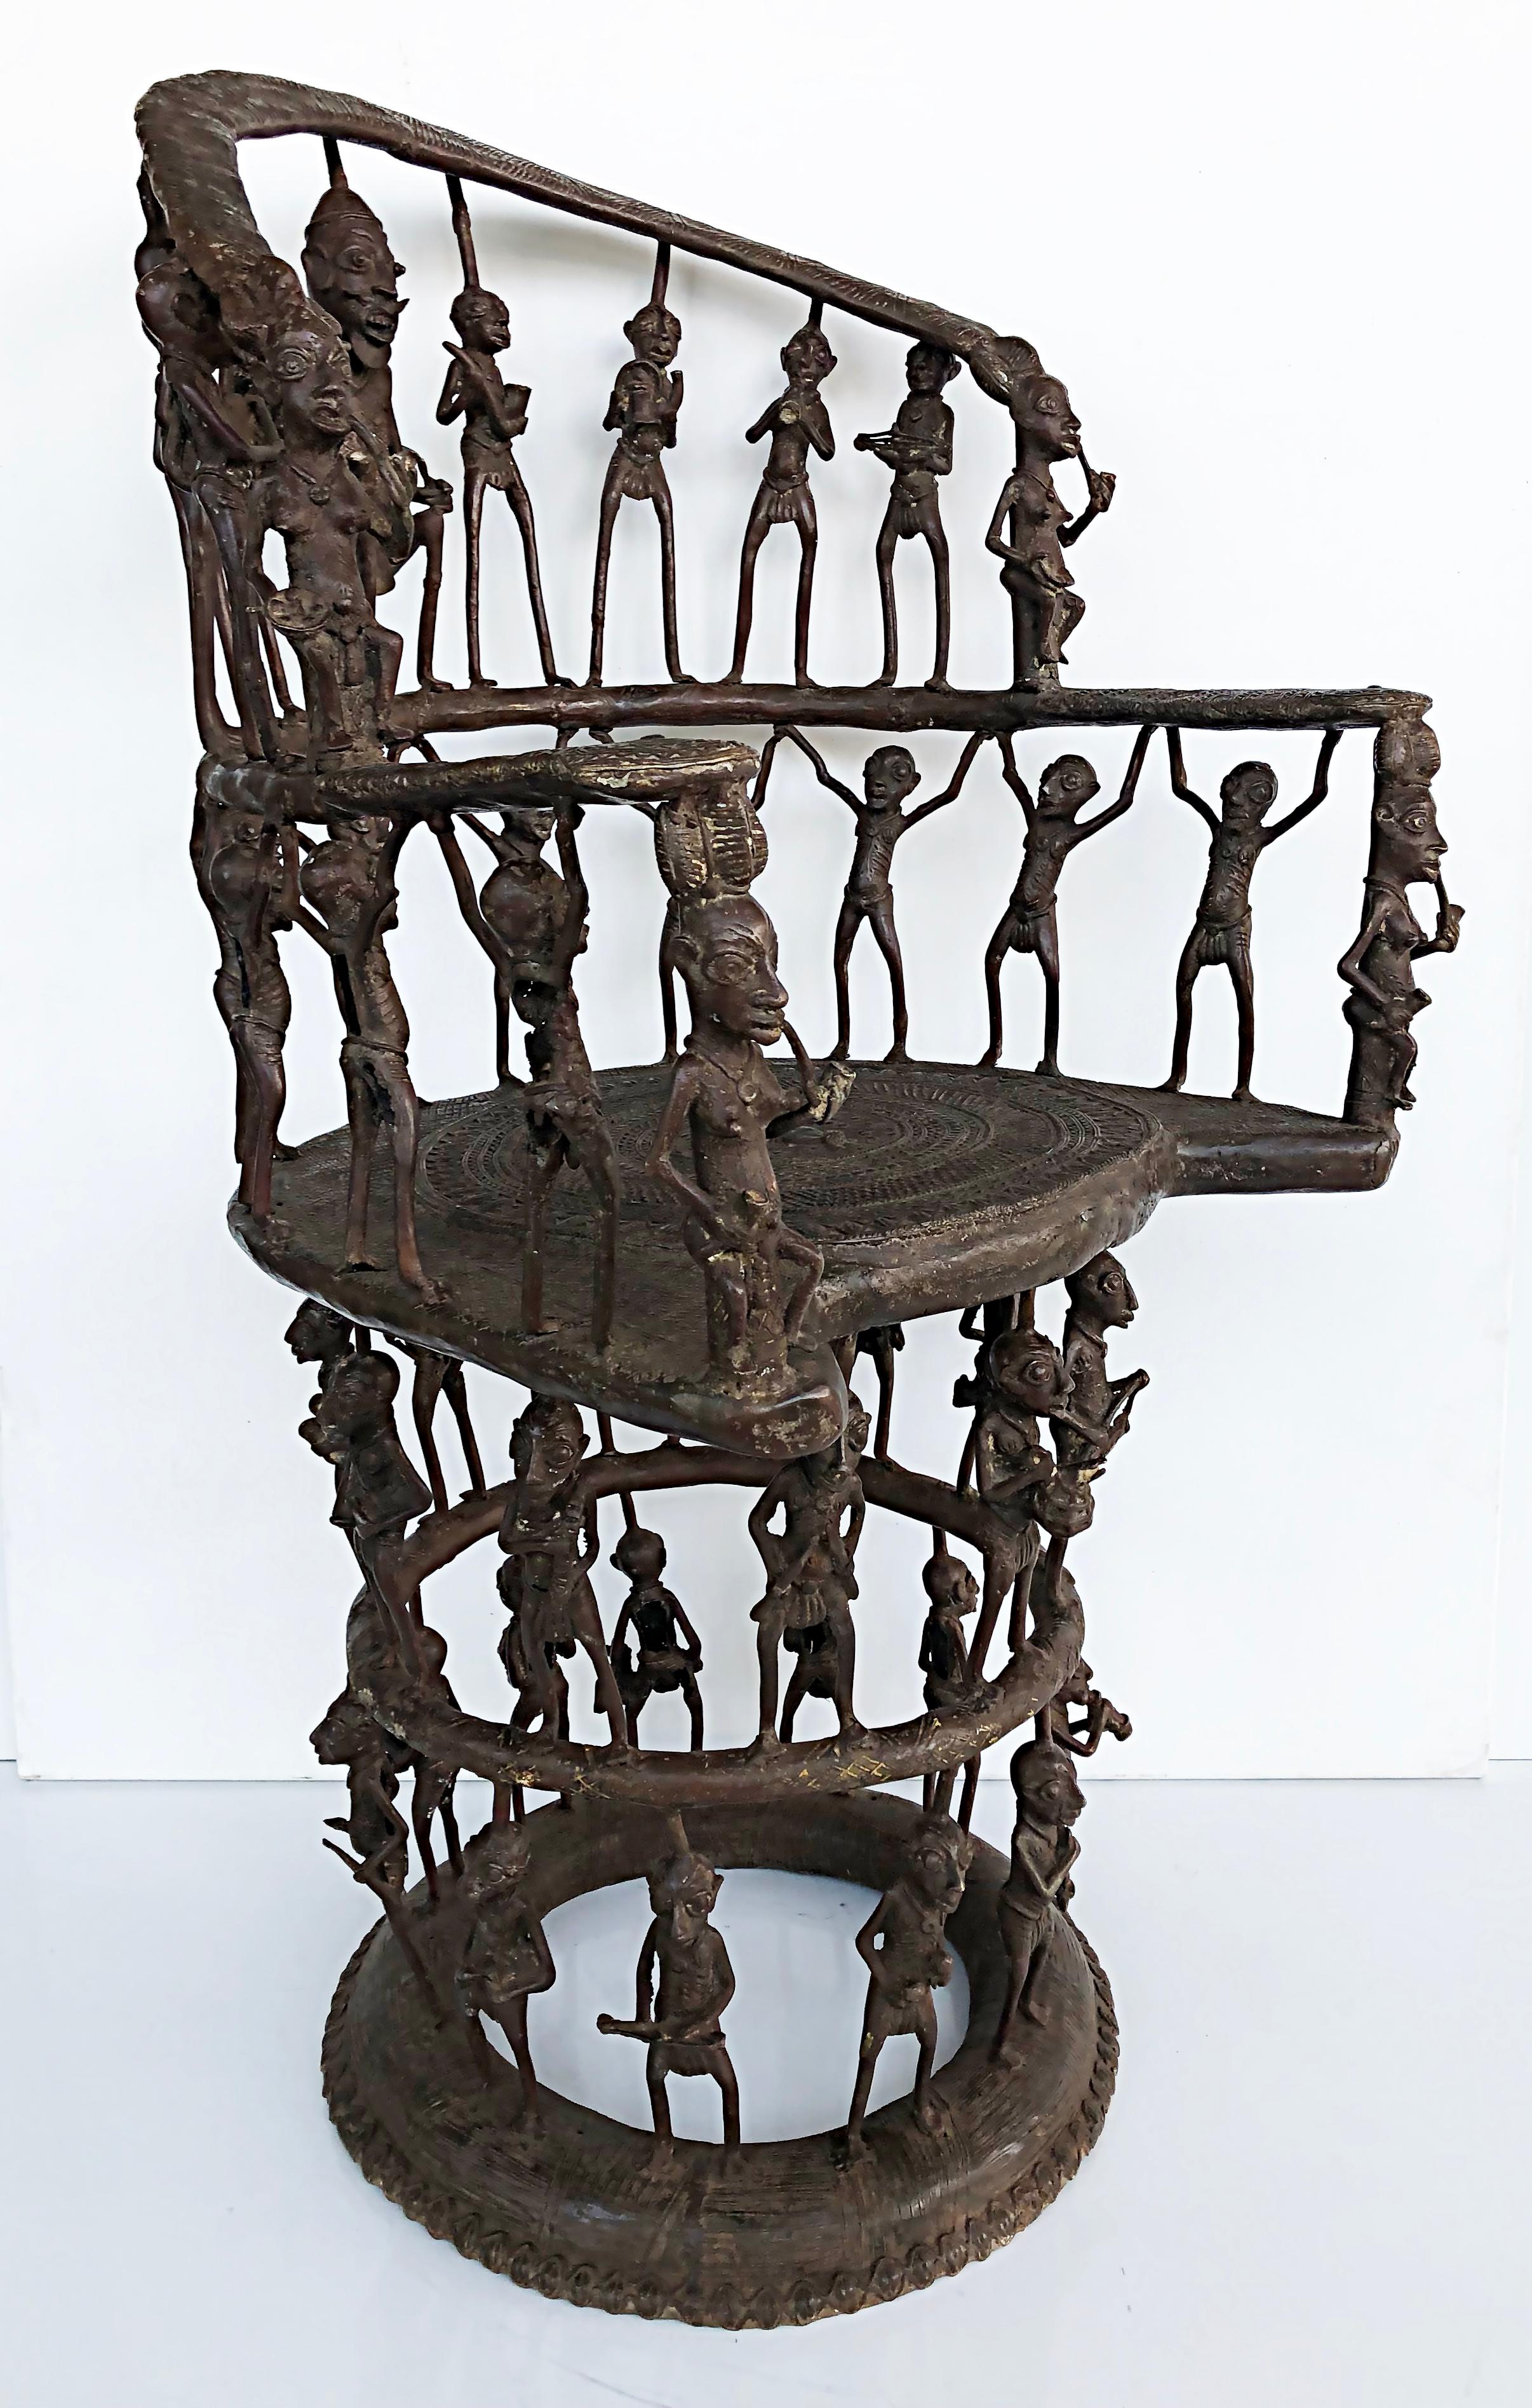 Rare African Cameroon Bronze Figurative Throne Chair, 20th Century

Offered for sale is a large rare African bronze figurative throne chair from Cameroon. The chair is a 20th-century creation after the tribal style. The chair has numerous figures